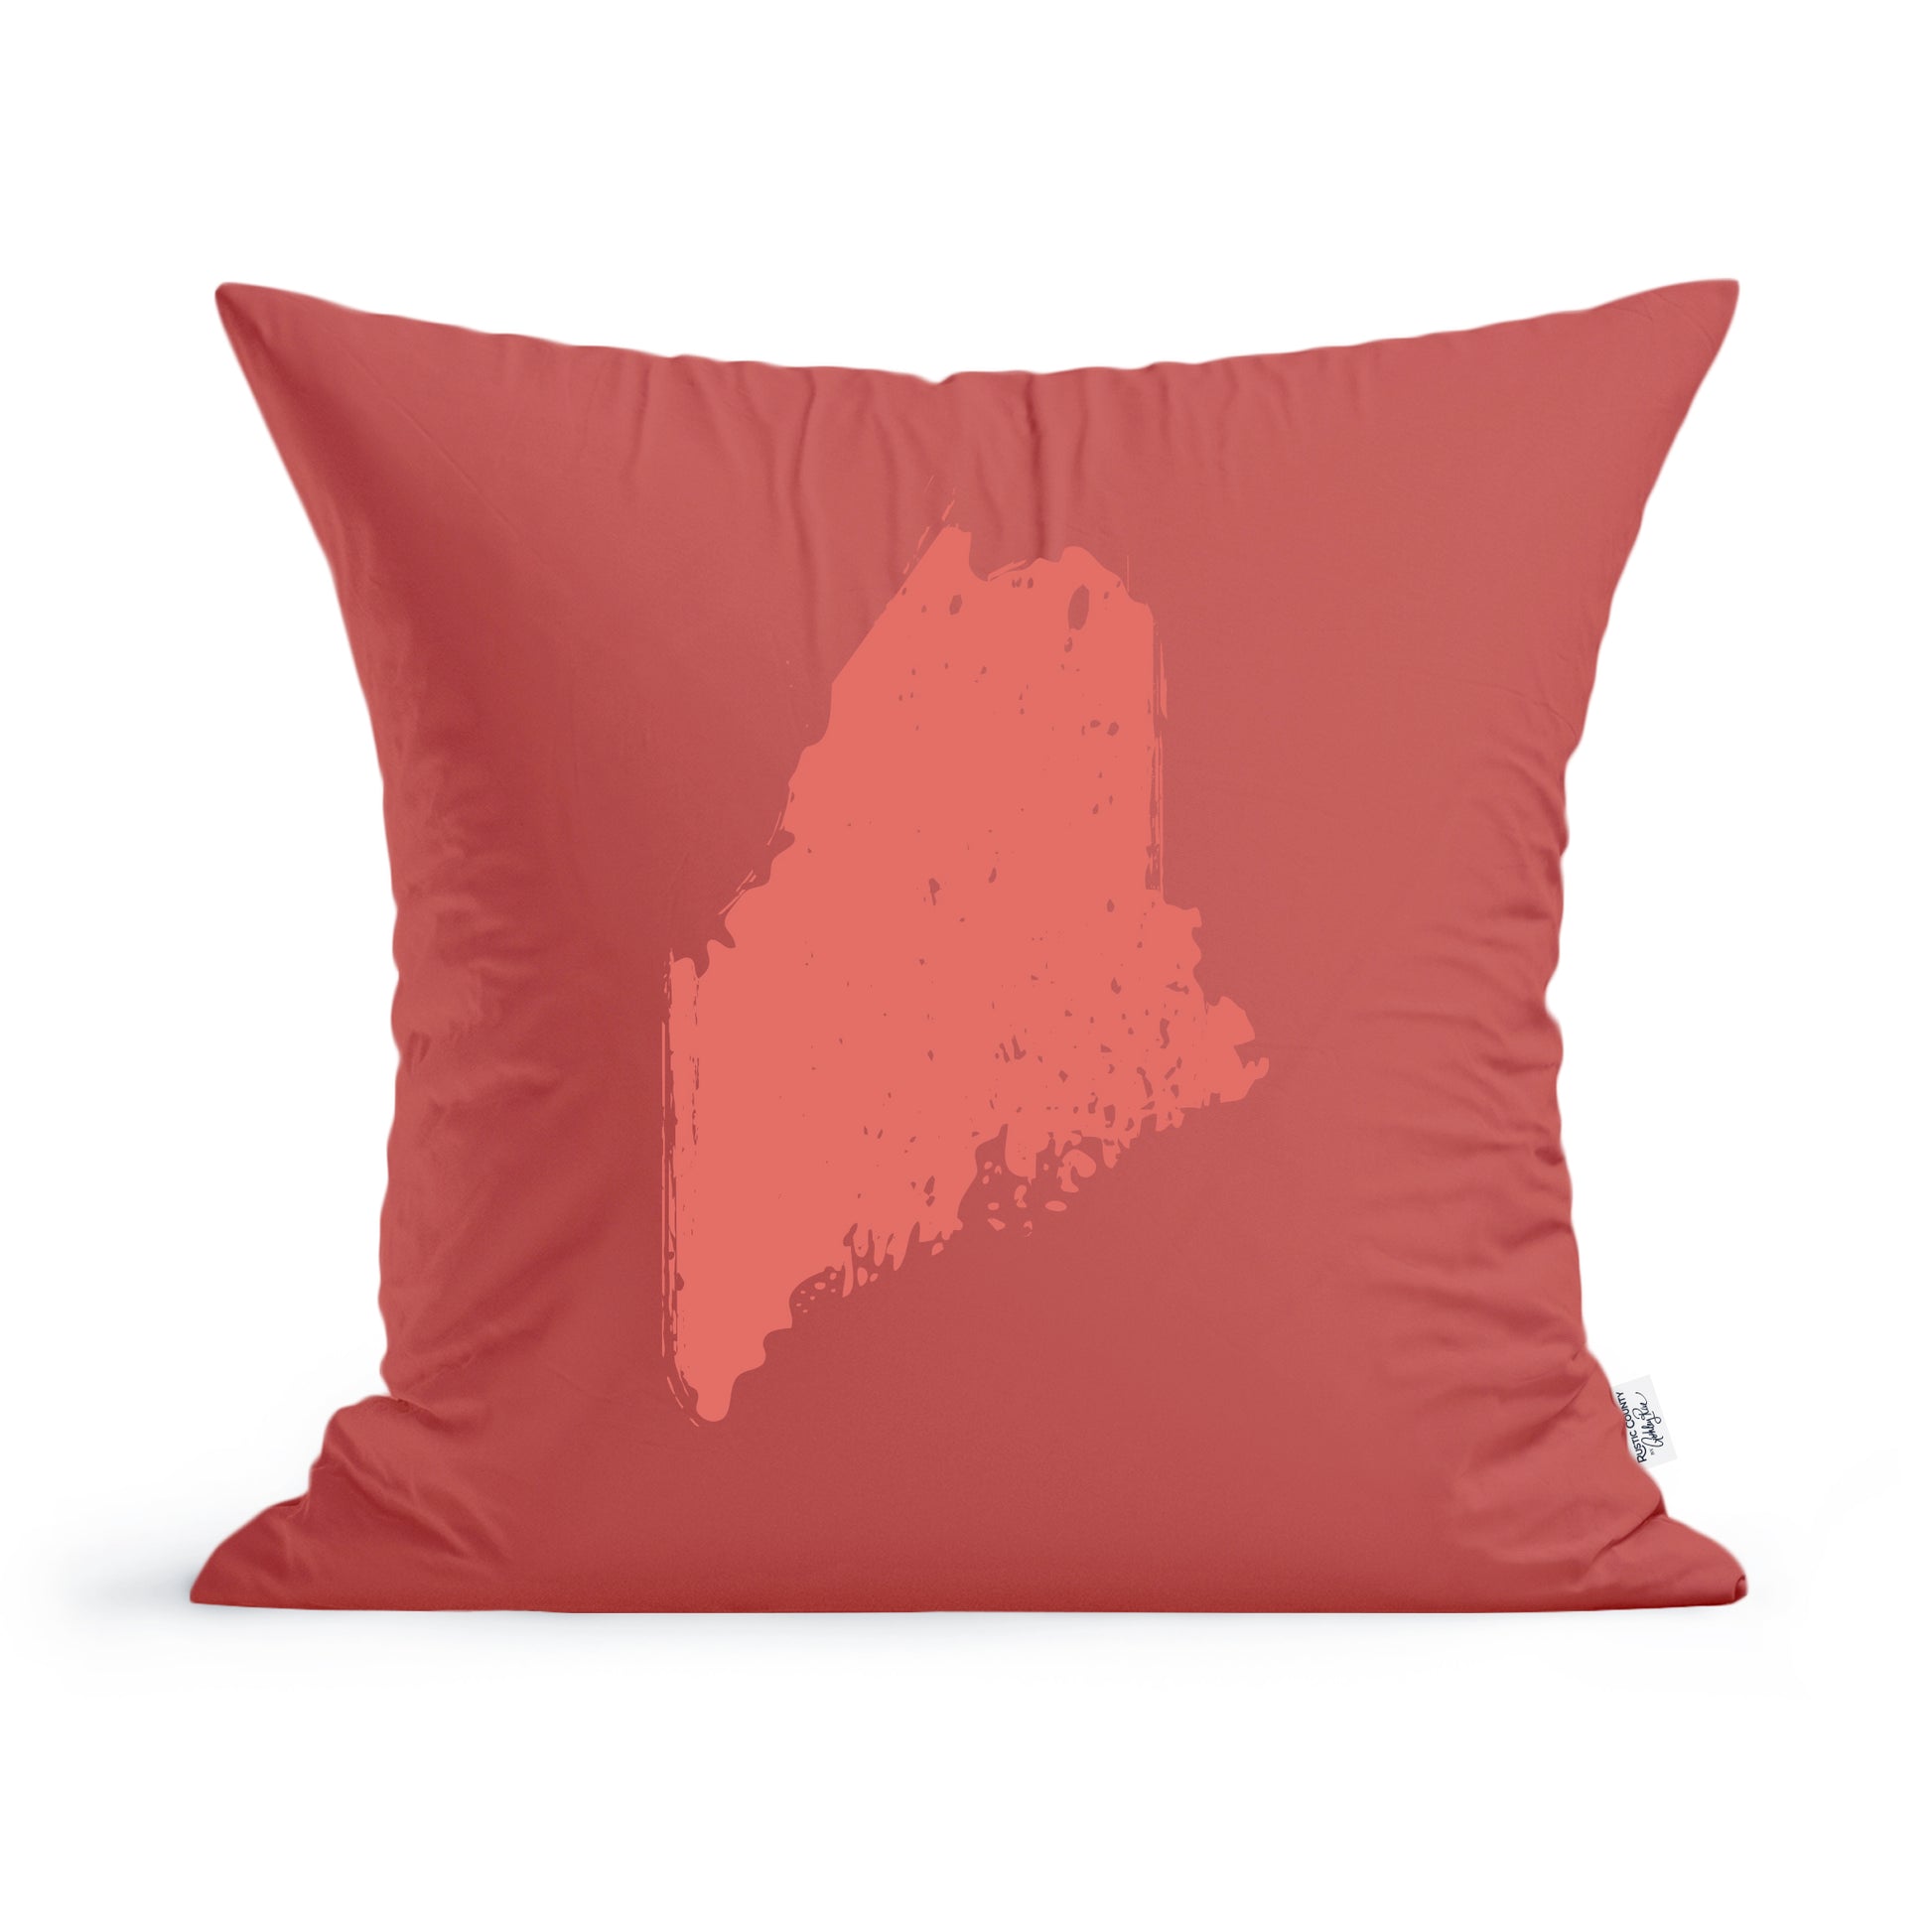 A red decorative Rustic County State of Maine throw pillow featuring a white silhouette of the state of Maine printed in the center.